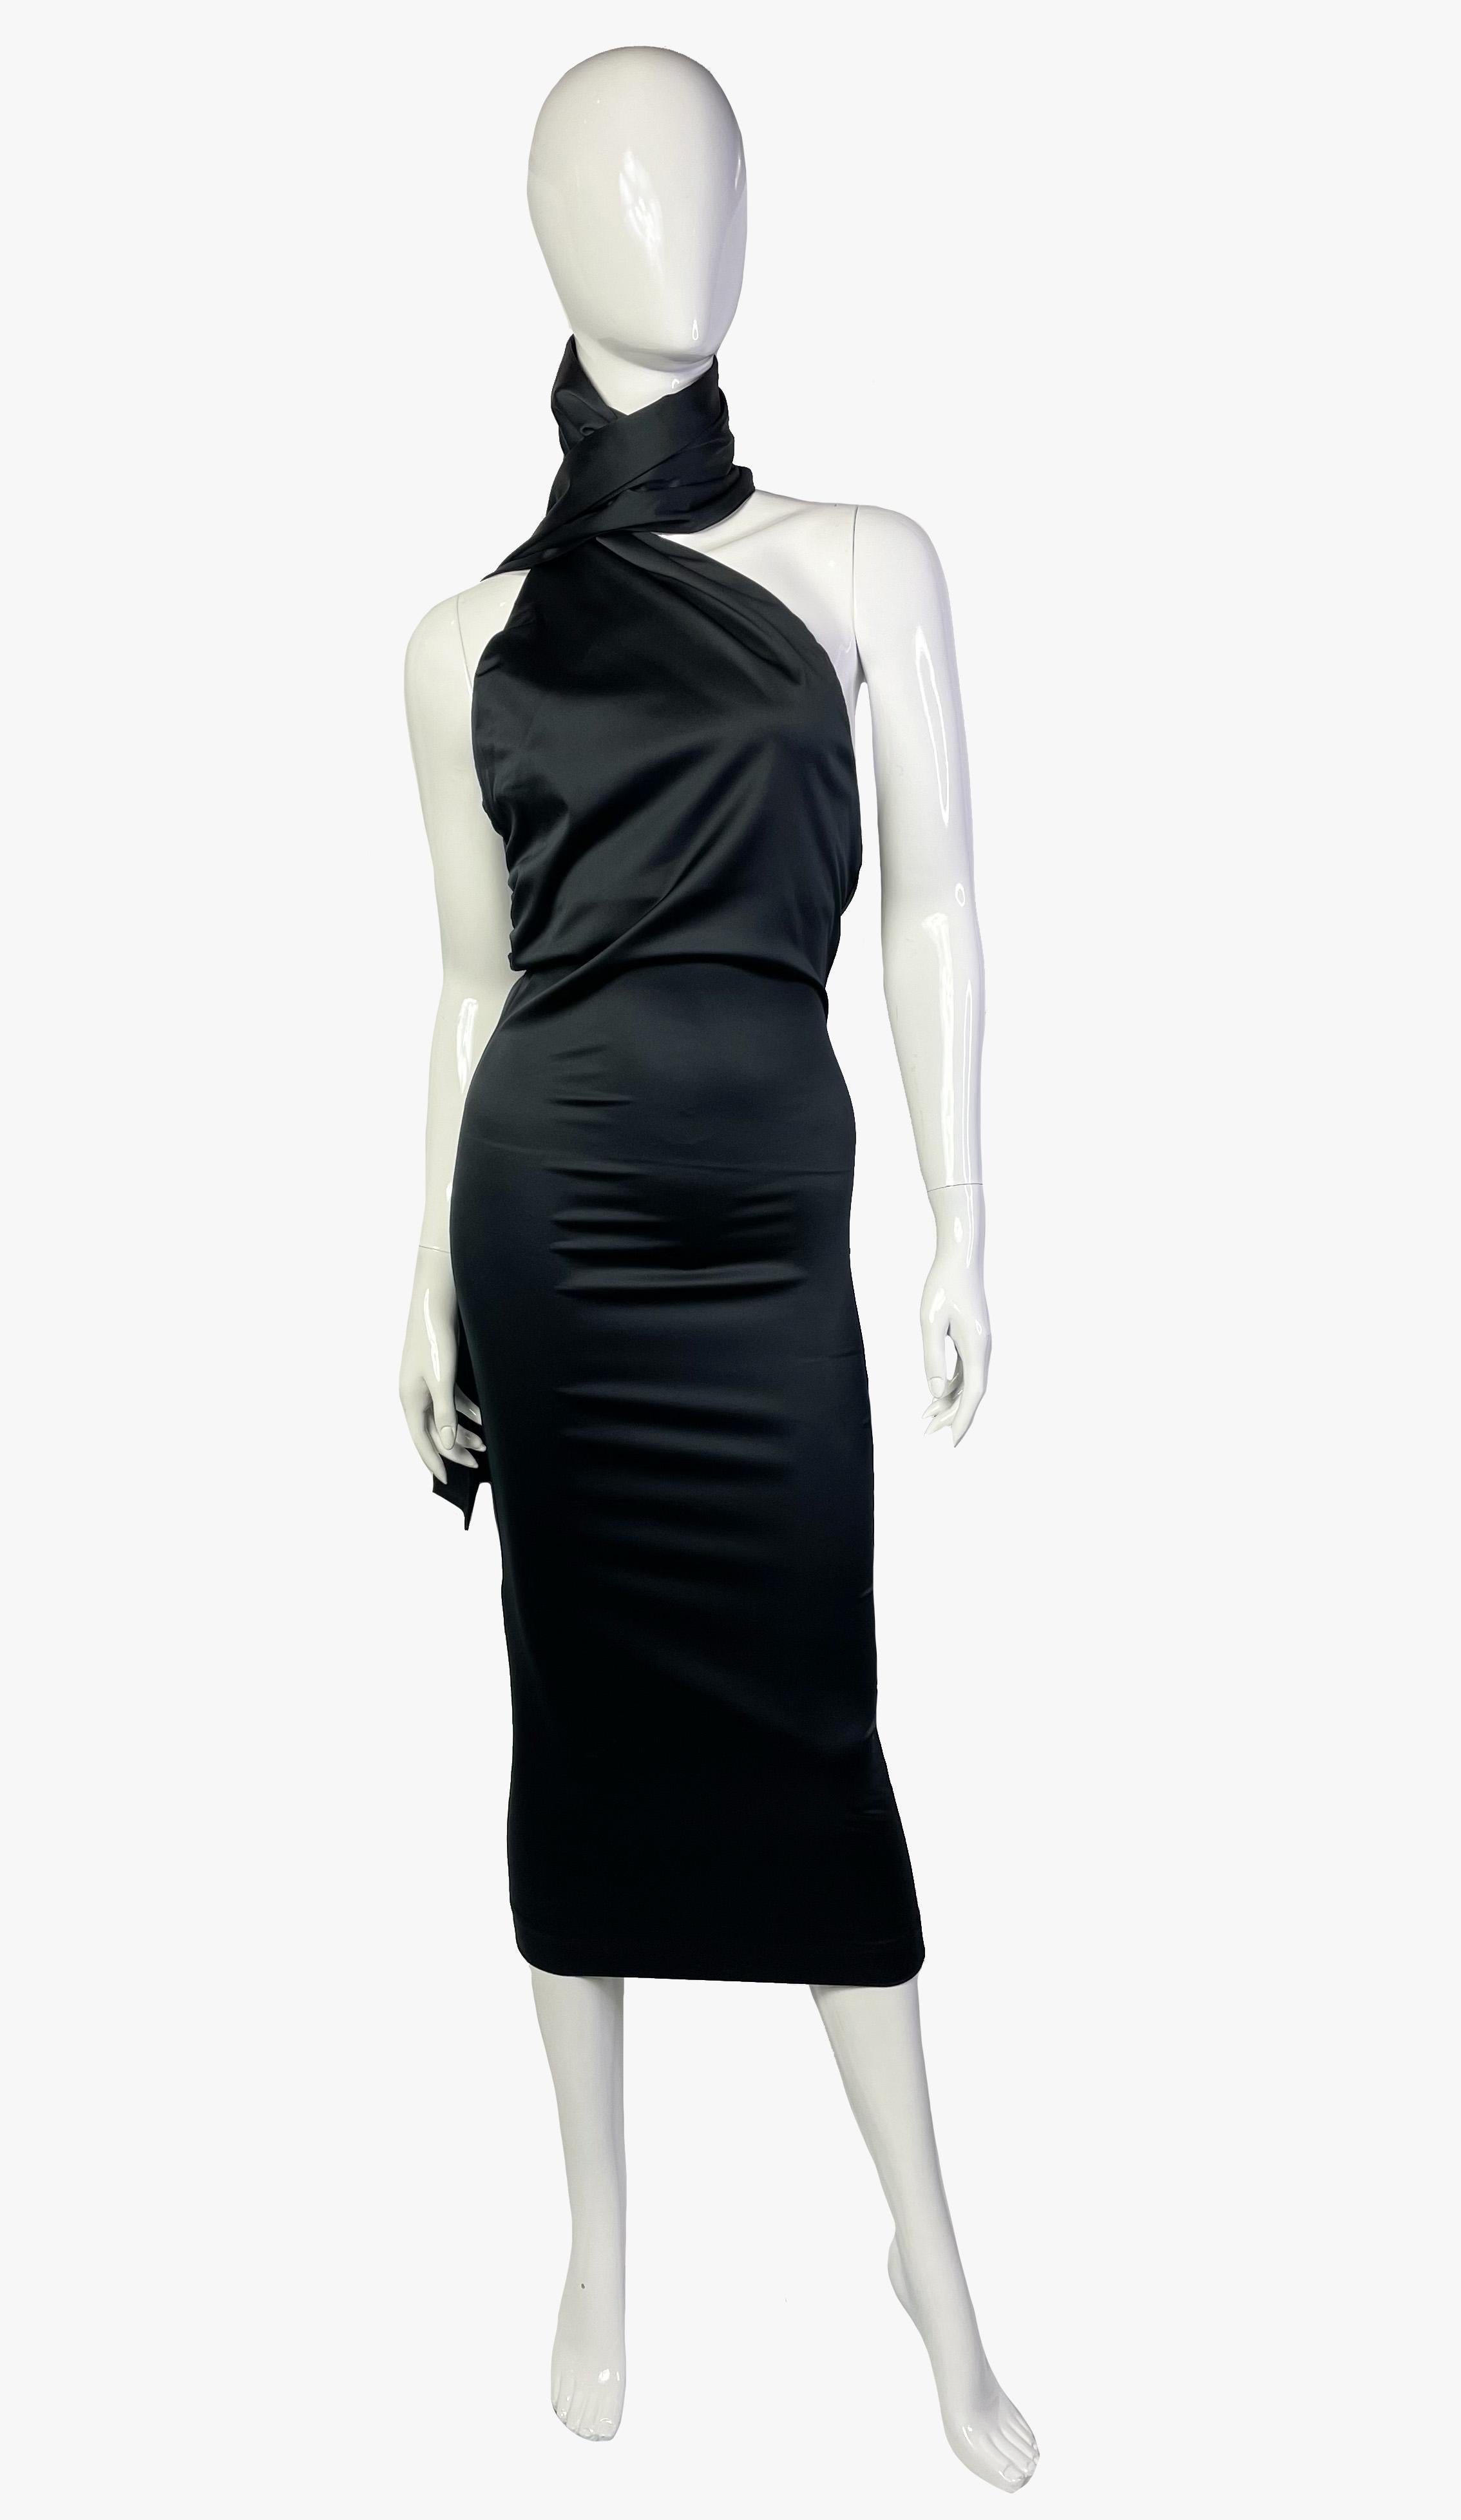 Alexander Mcqueen evening fitted dress, sleeveless, open back

Fabric is elastic. 

Size – IT38, XS-S

Length – 108 cm / 42,5”

Fabric –  92% poliester, 8% elastic

Condition – very good

........Additional information ........

- Photo might be